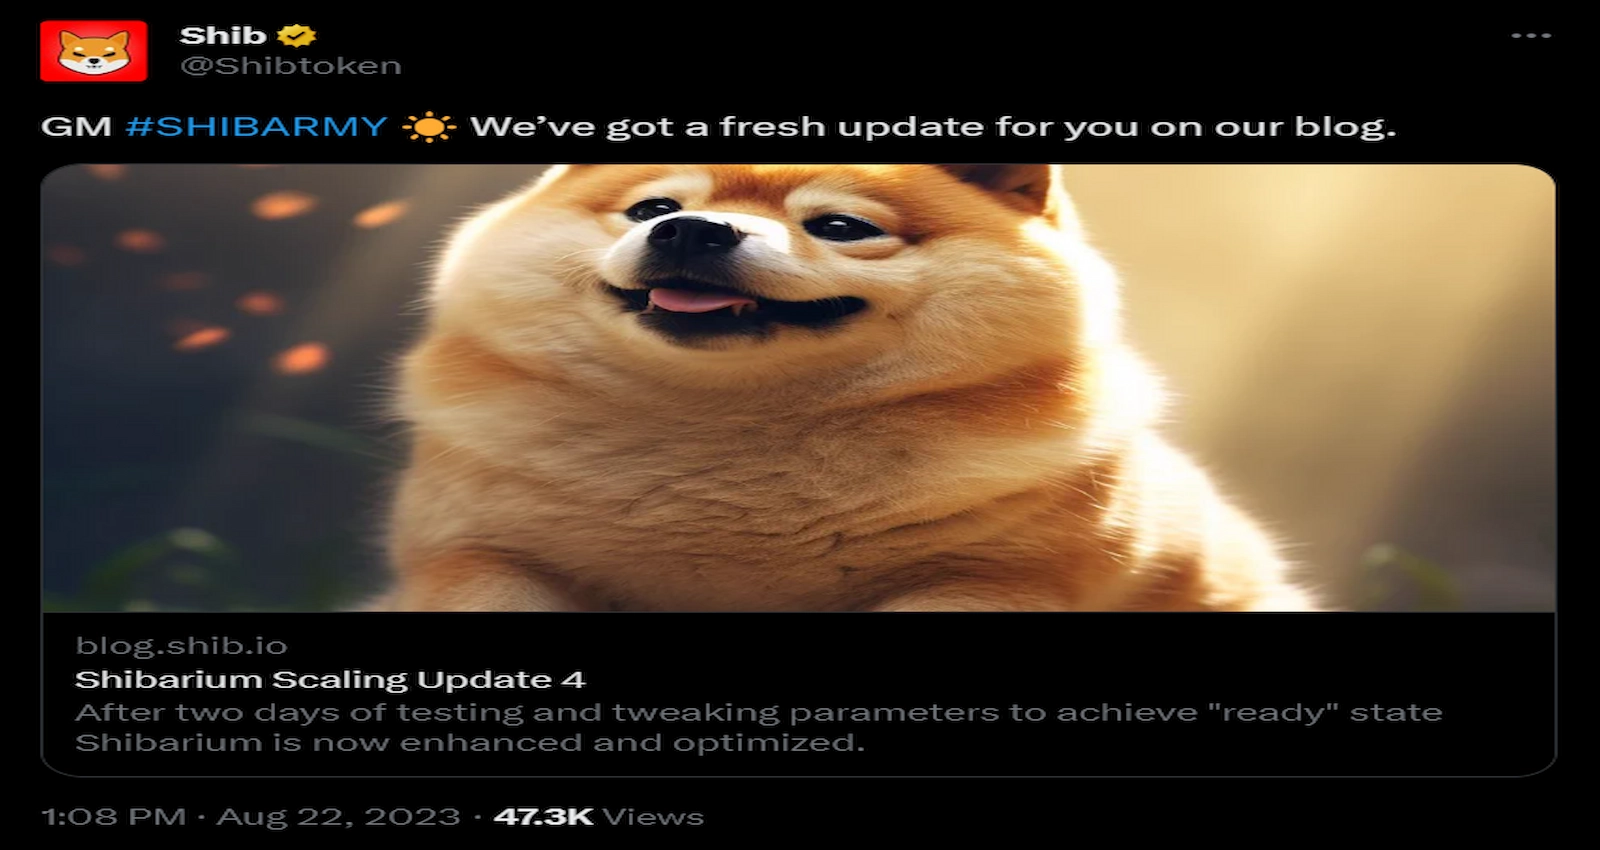 Shiba Inu developers stated that Shibarium was a relaunch